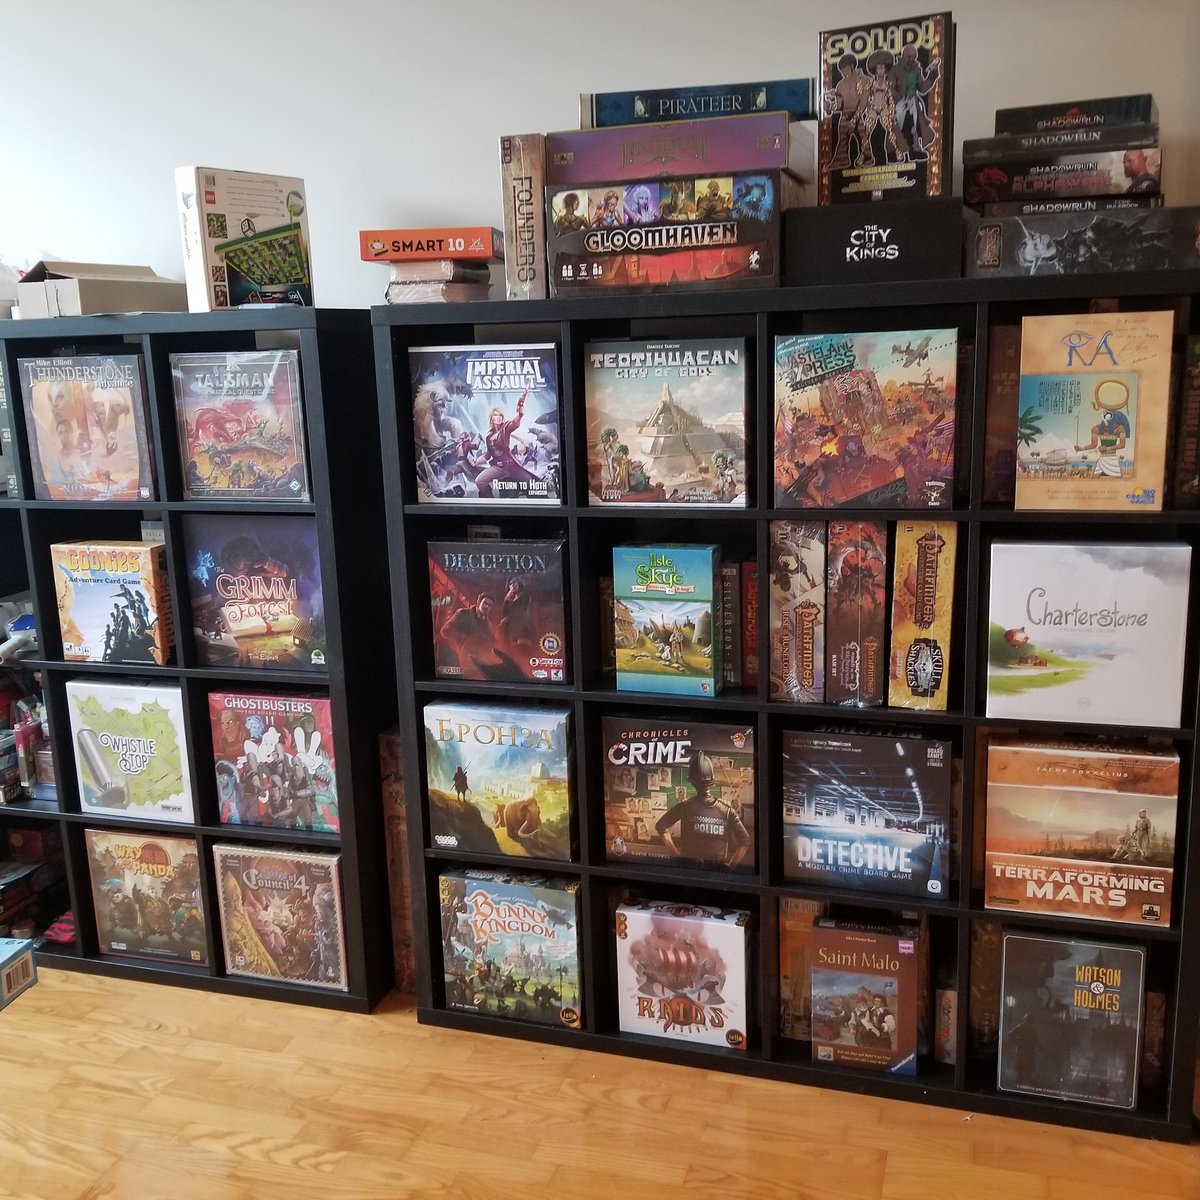 Less than half my collection ... show me yours!

#boardgames #tabletopgames #tabletopgaming #TabletopMatters #boardgame #boardgamegeek